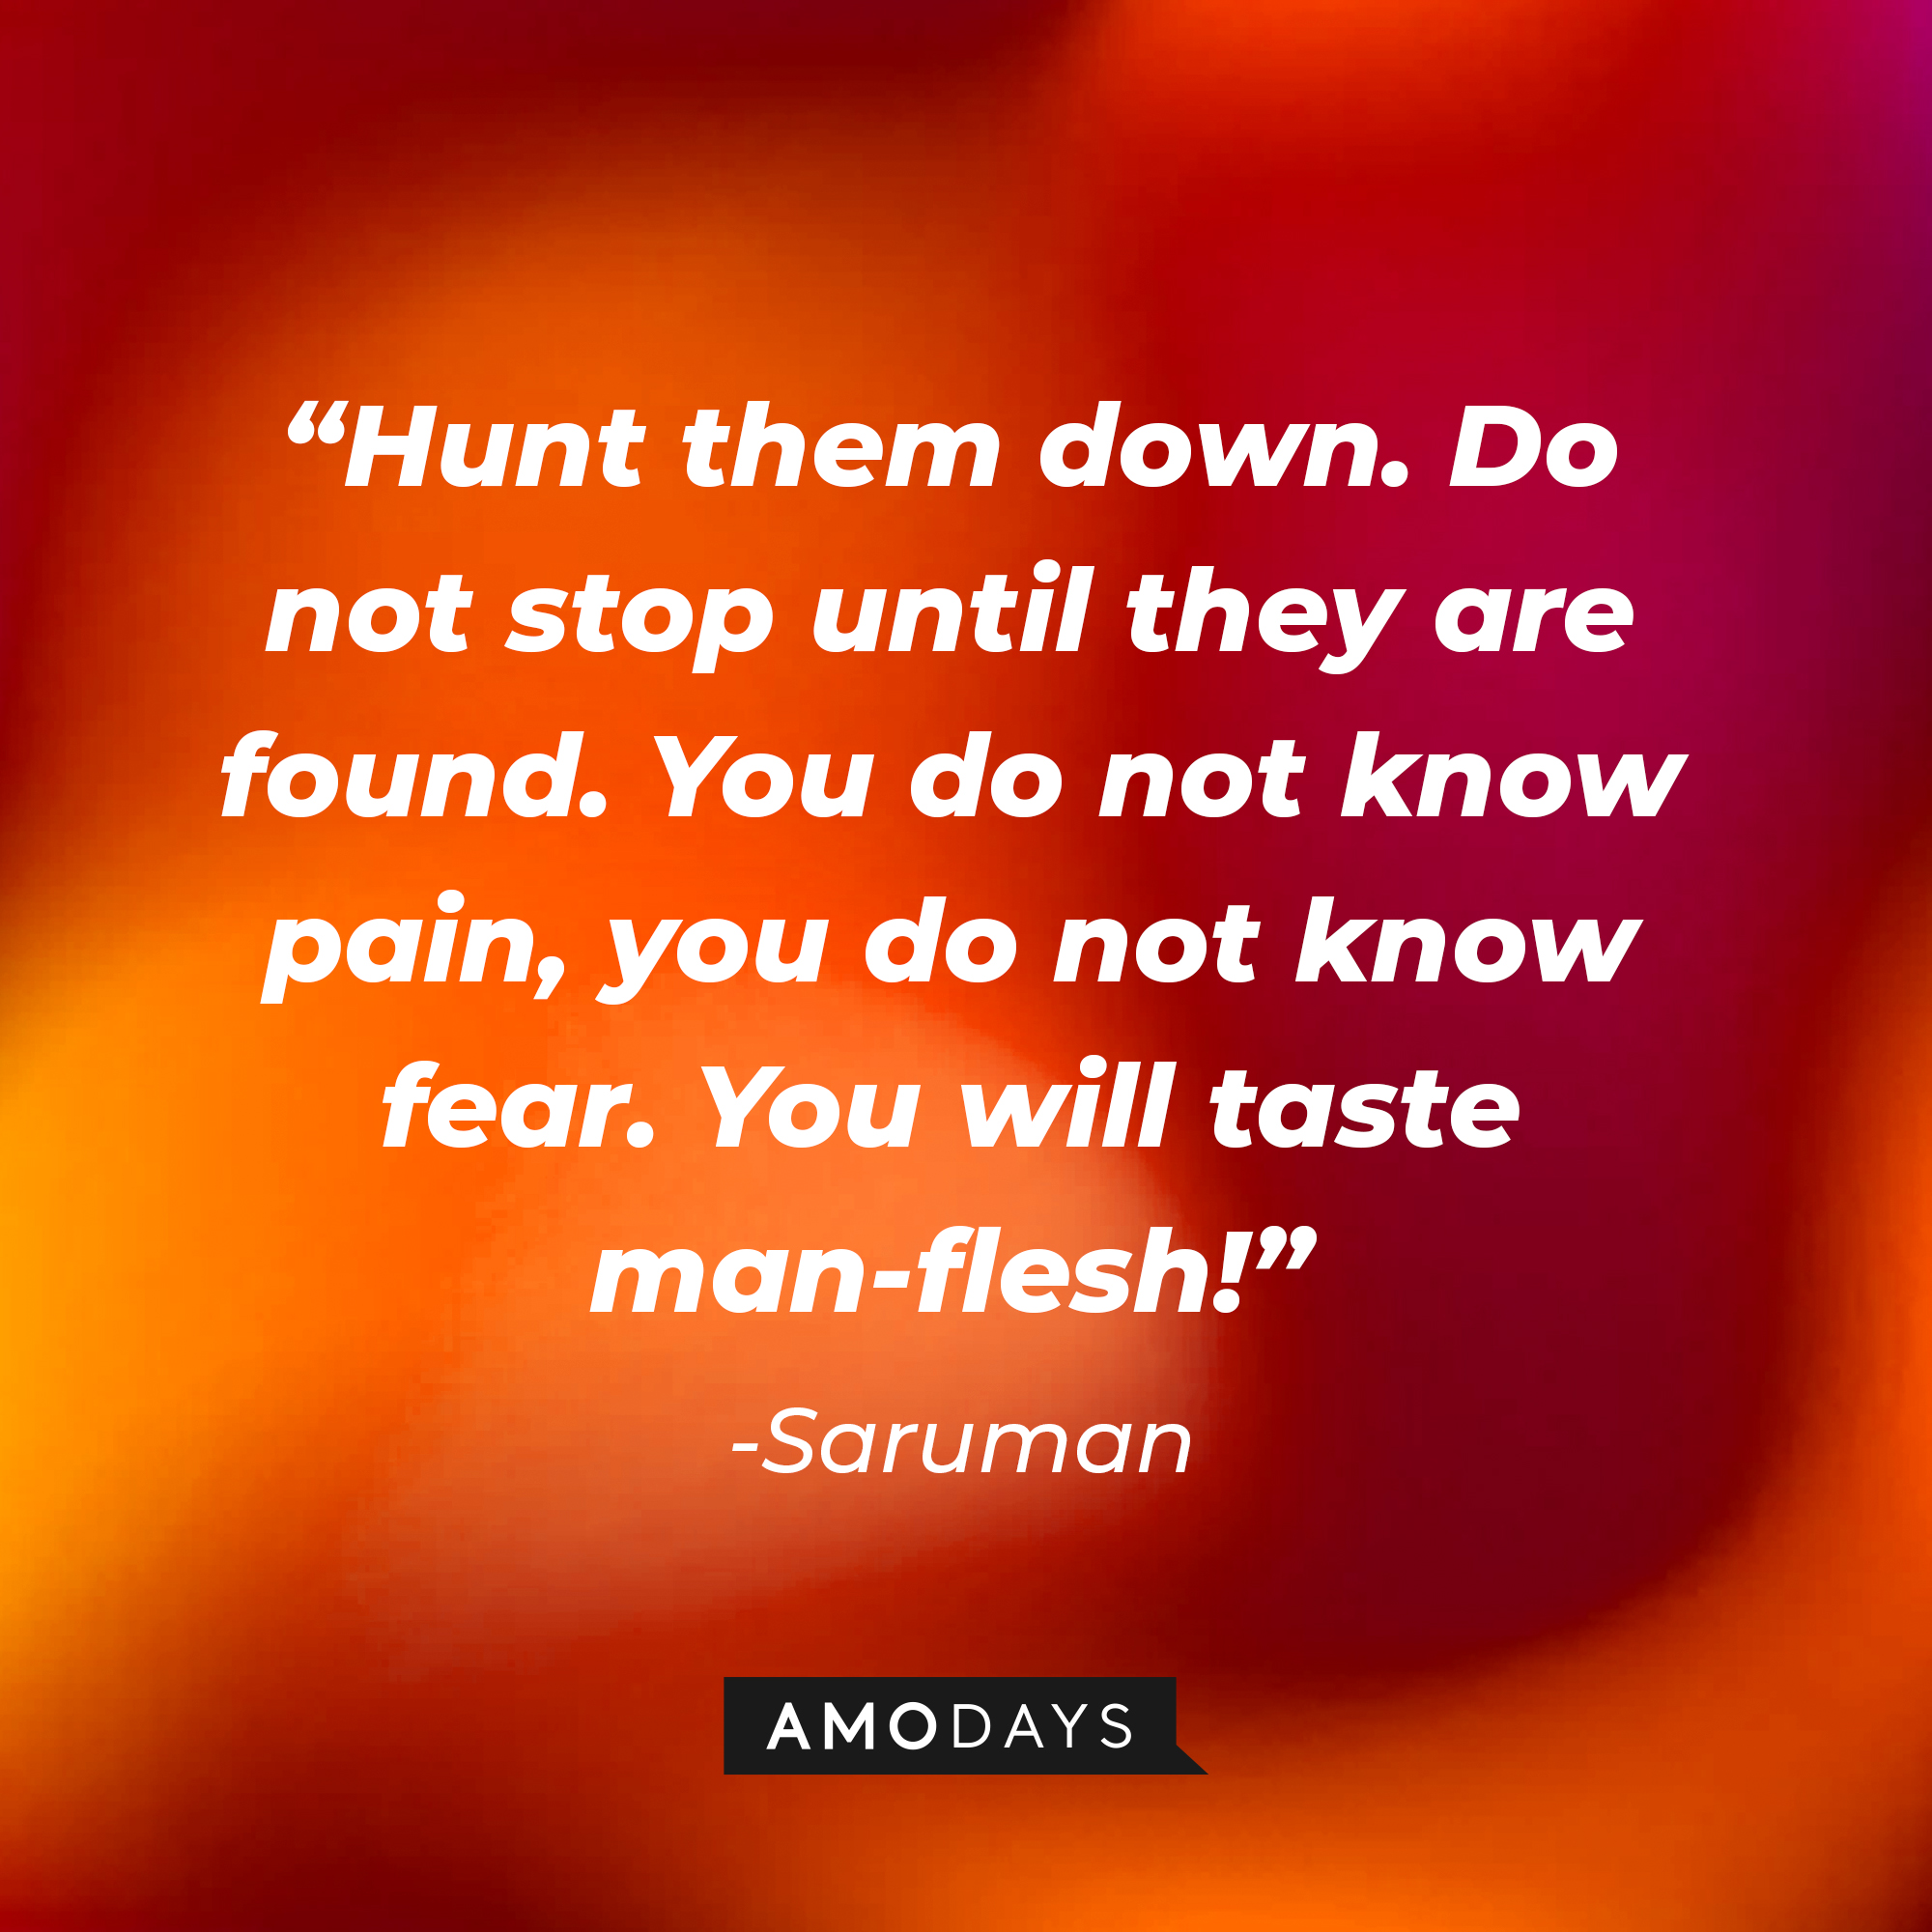 Saruman's quote: “Hunt them down. Do not stop until they are found. You do not know pain, you do not know fear. You will taste man-flesh!” | Source: Amodays